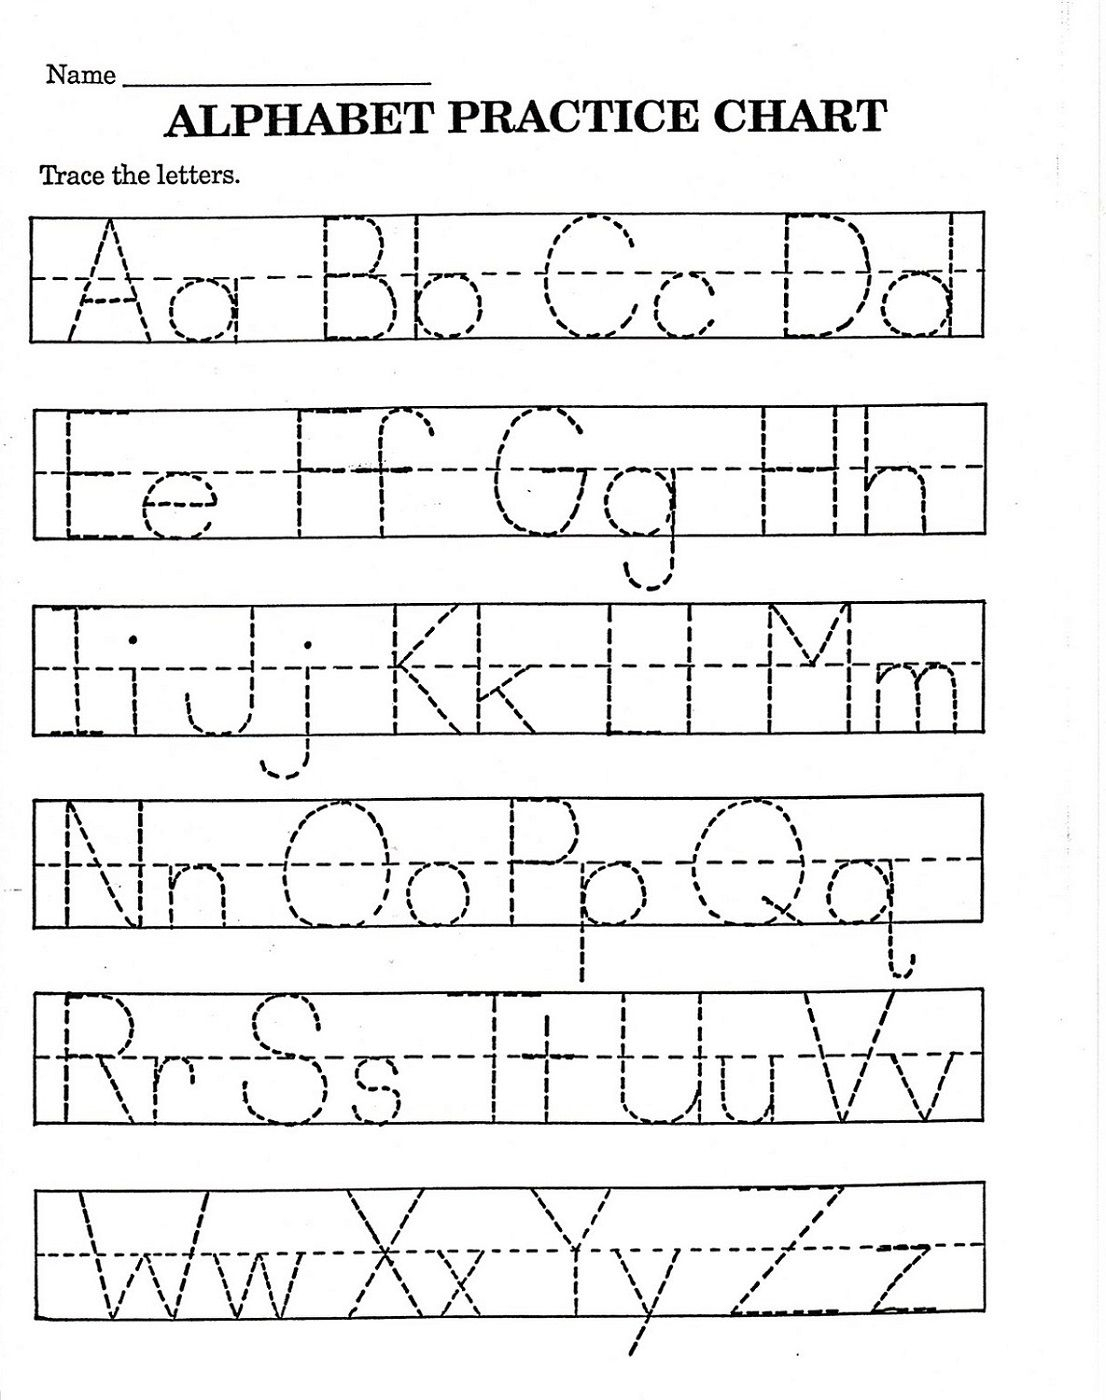 Trace Letter Worksheets Free | Alphabet Tracing Worksheets inside Tracing Letters Worksheets Free